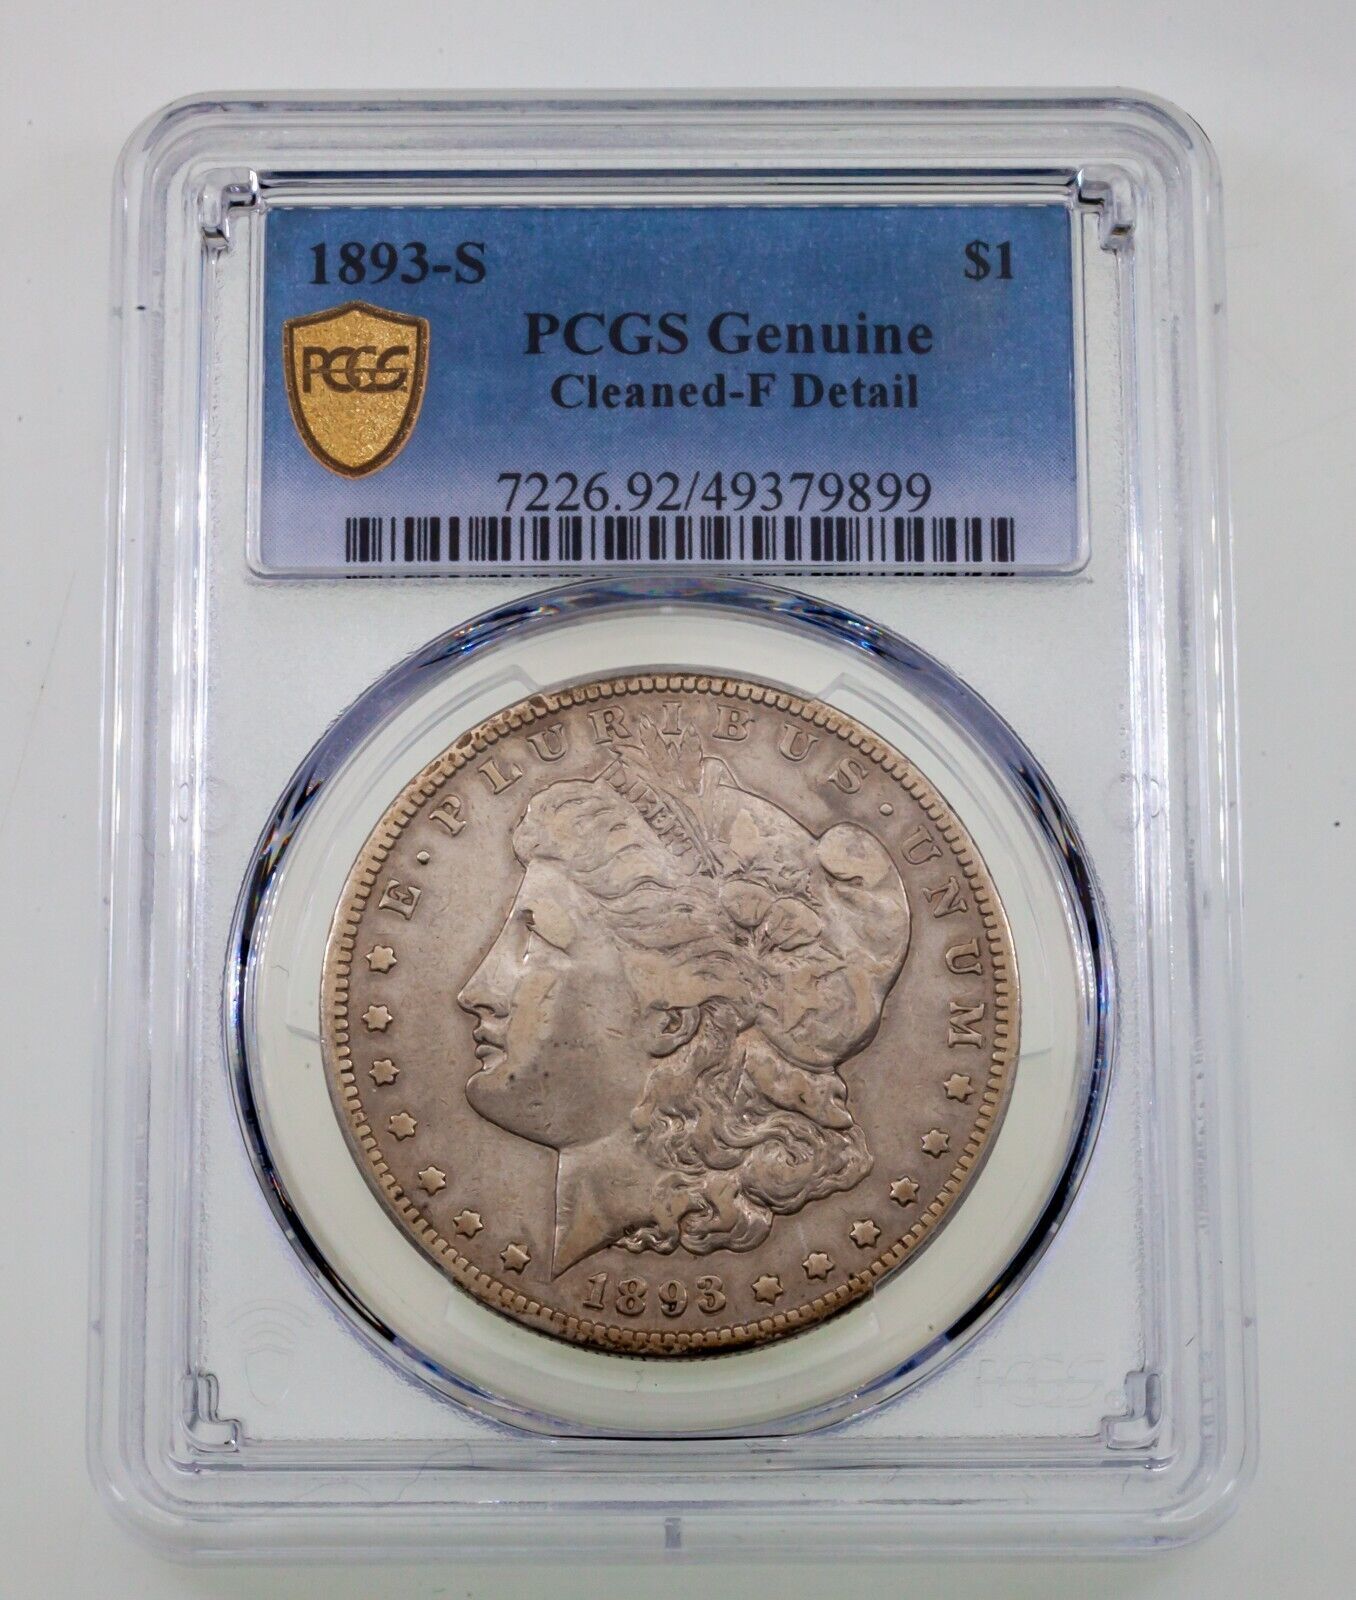 Primary image for 1893-S $1 Silver Morgan Dollar Graded by PCGS as Fine Details - Cleaned Key Date